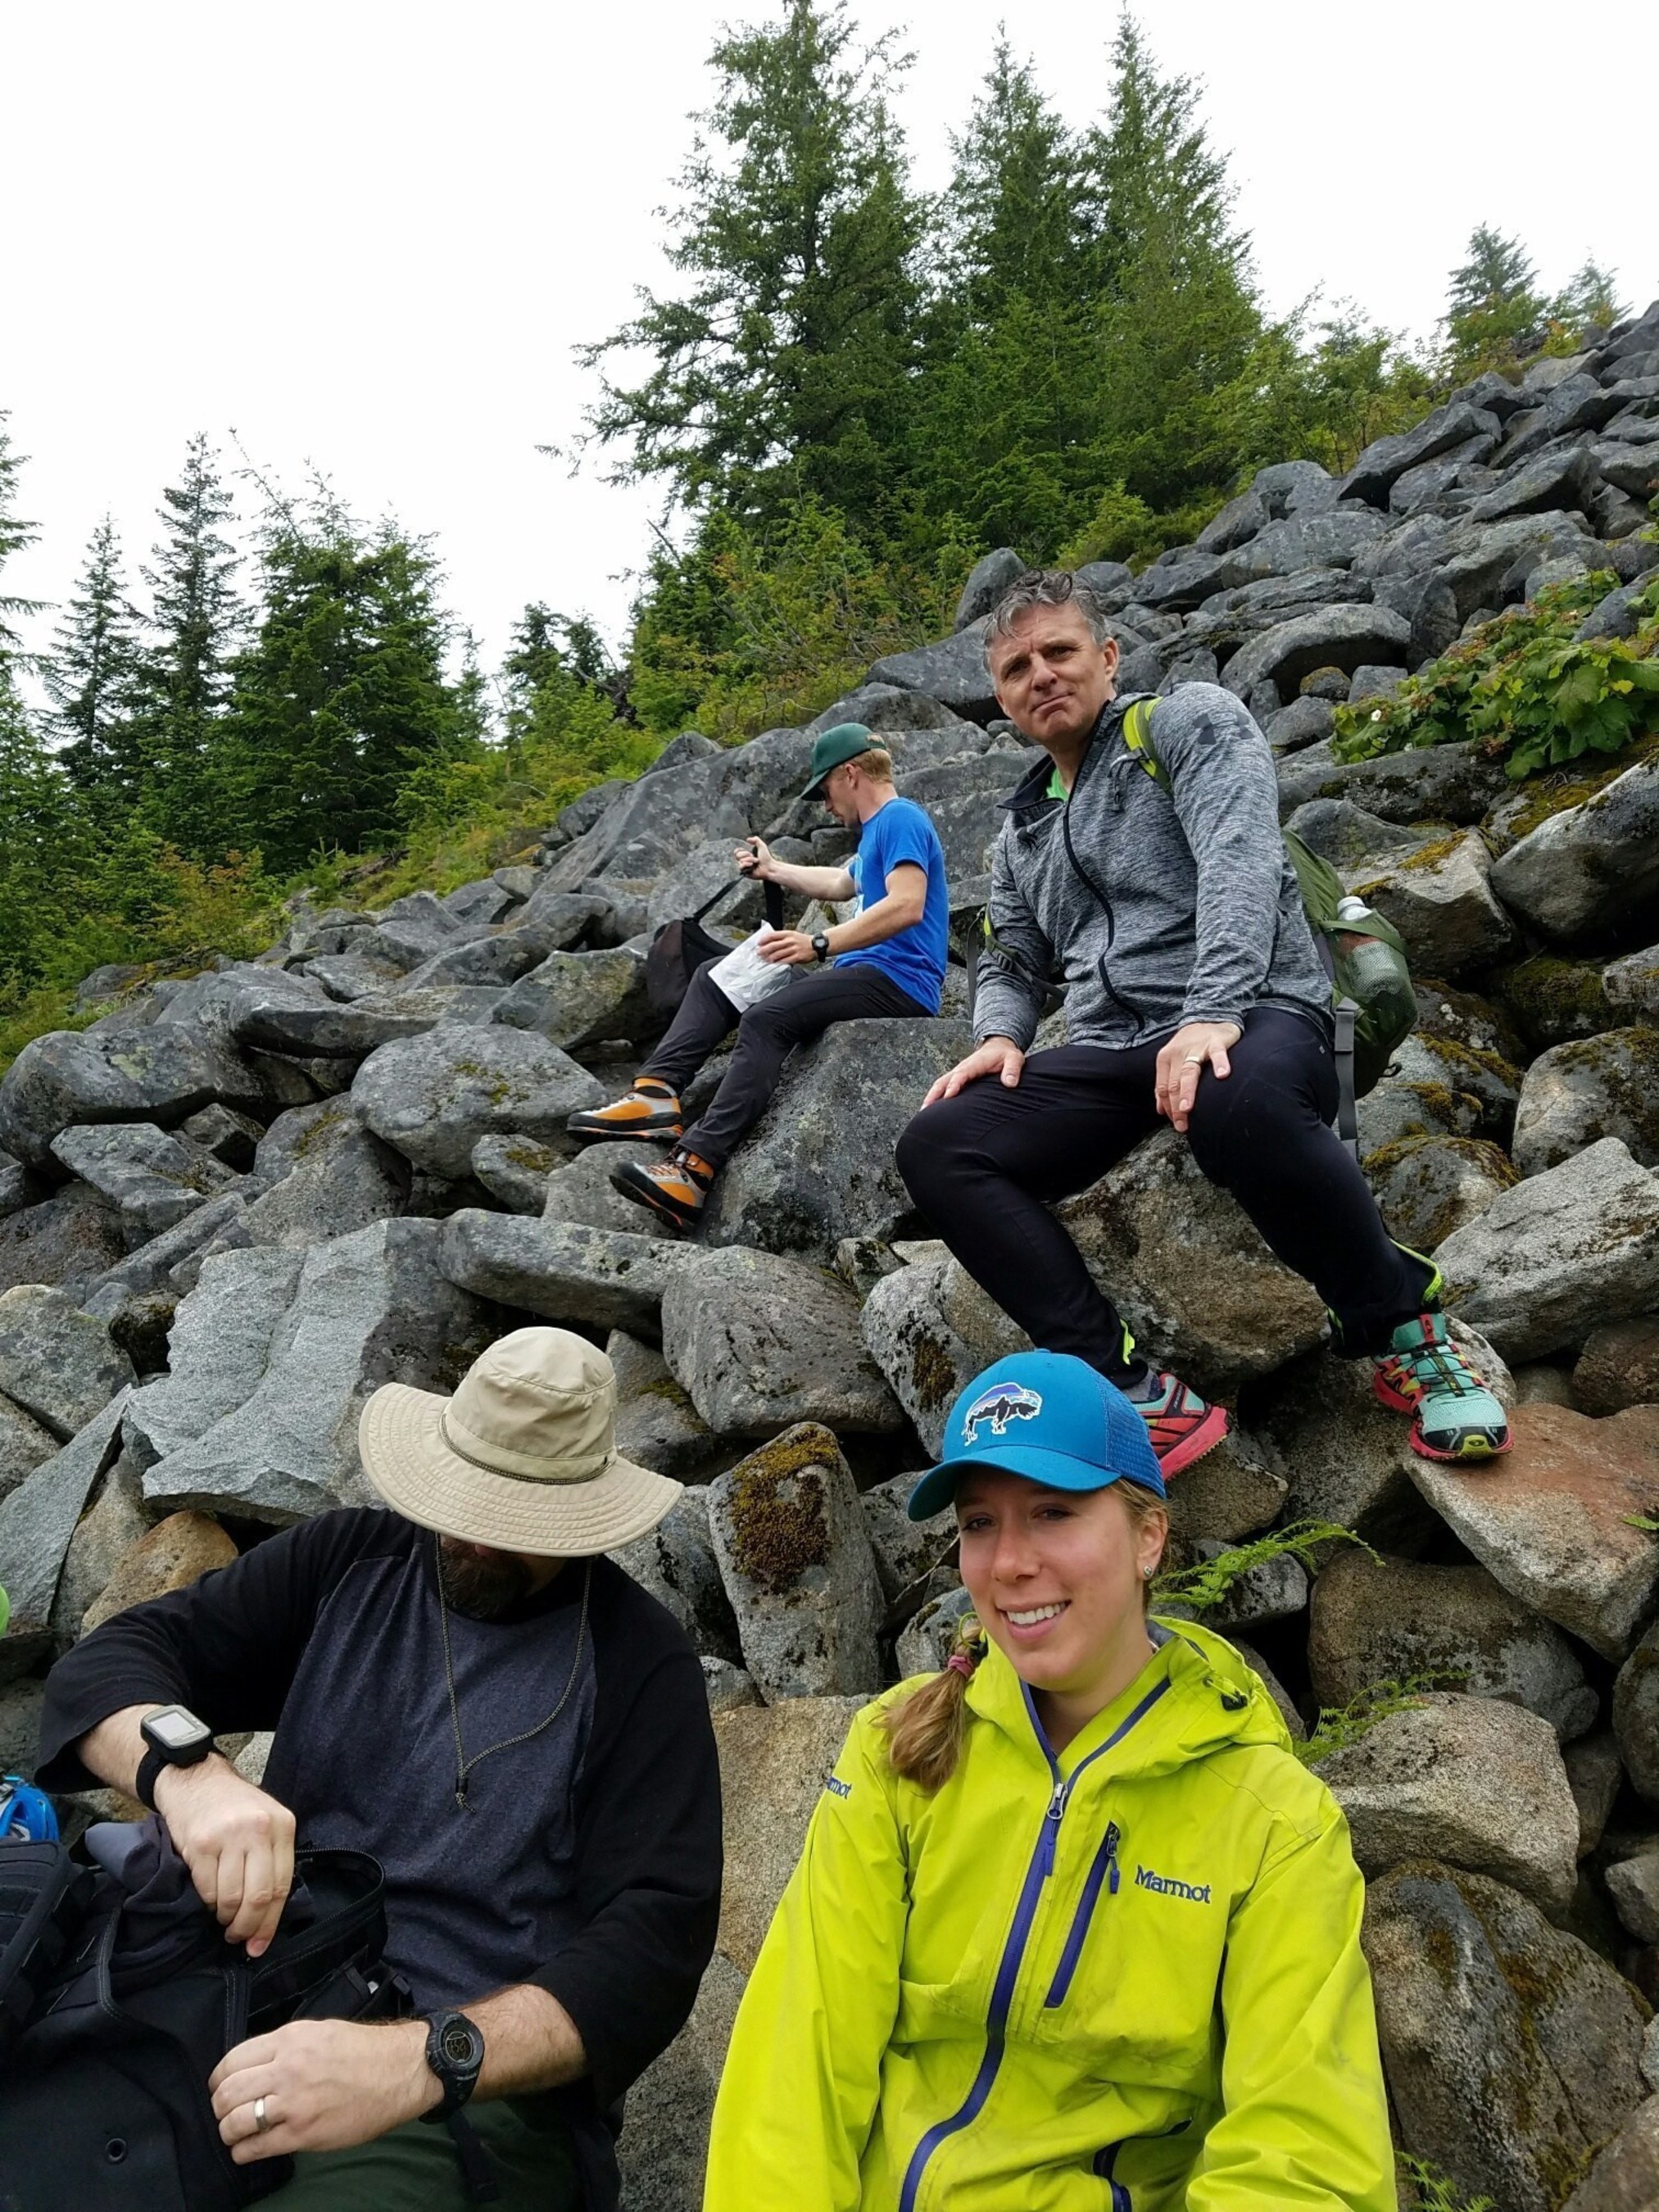 A group of veterans and their families in the Pacific Northwest are actively taking part in a virtual hiking program, which requires participants to walk or hike three to four times per week on their own and track their progress.